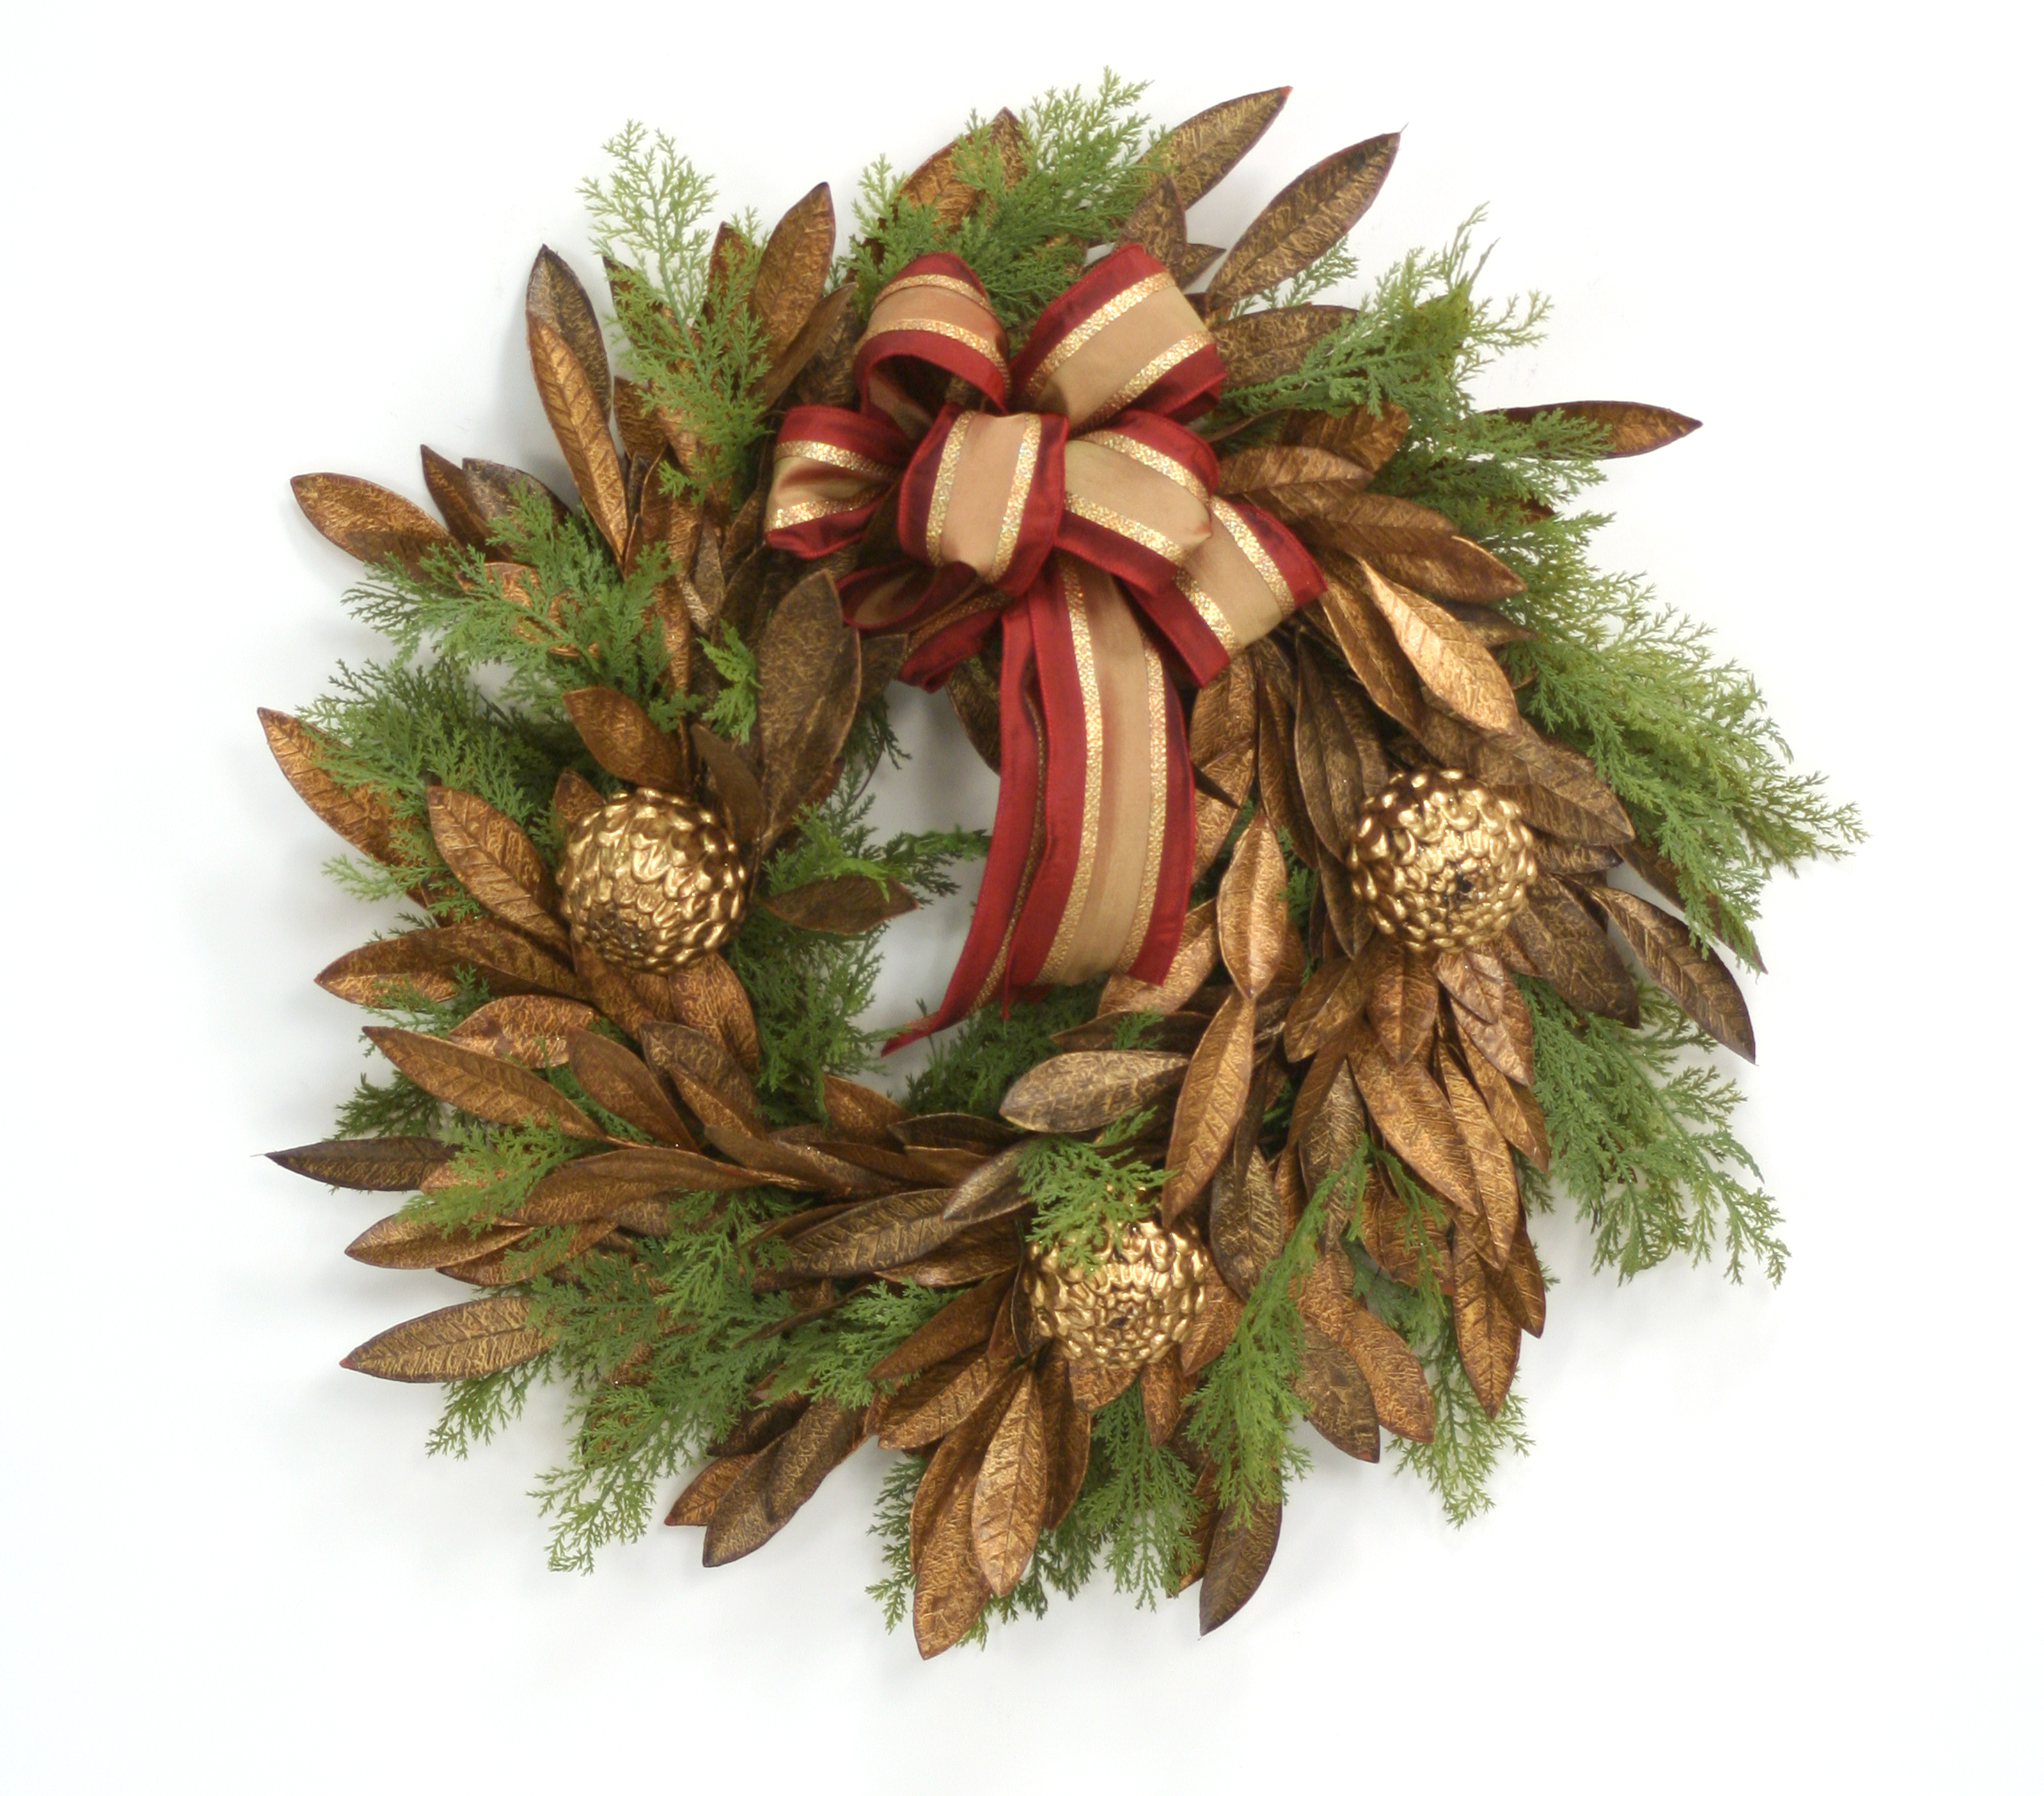 Wreath - 24' Bay Leaf Wreath with Cedar and Antique Gold Pine Cones with Ribbon